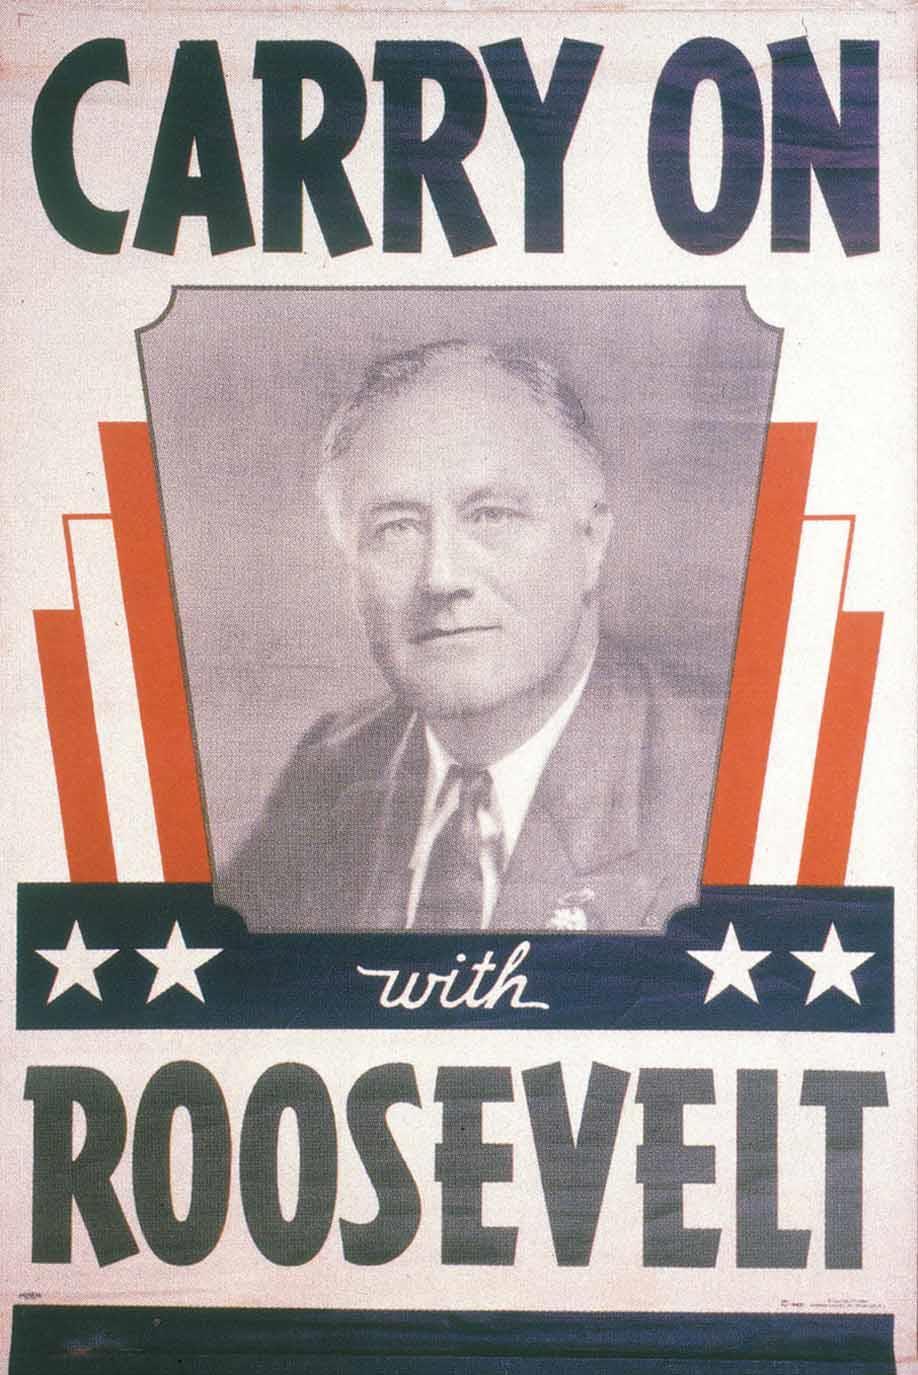 The Roosevelt realignment 8.